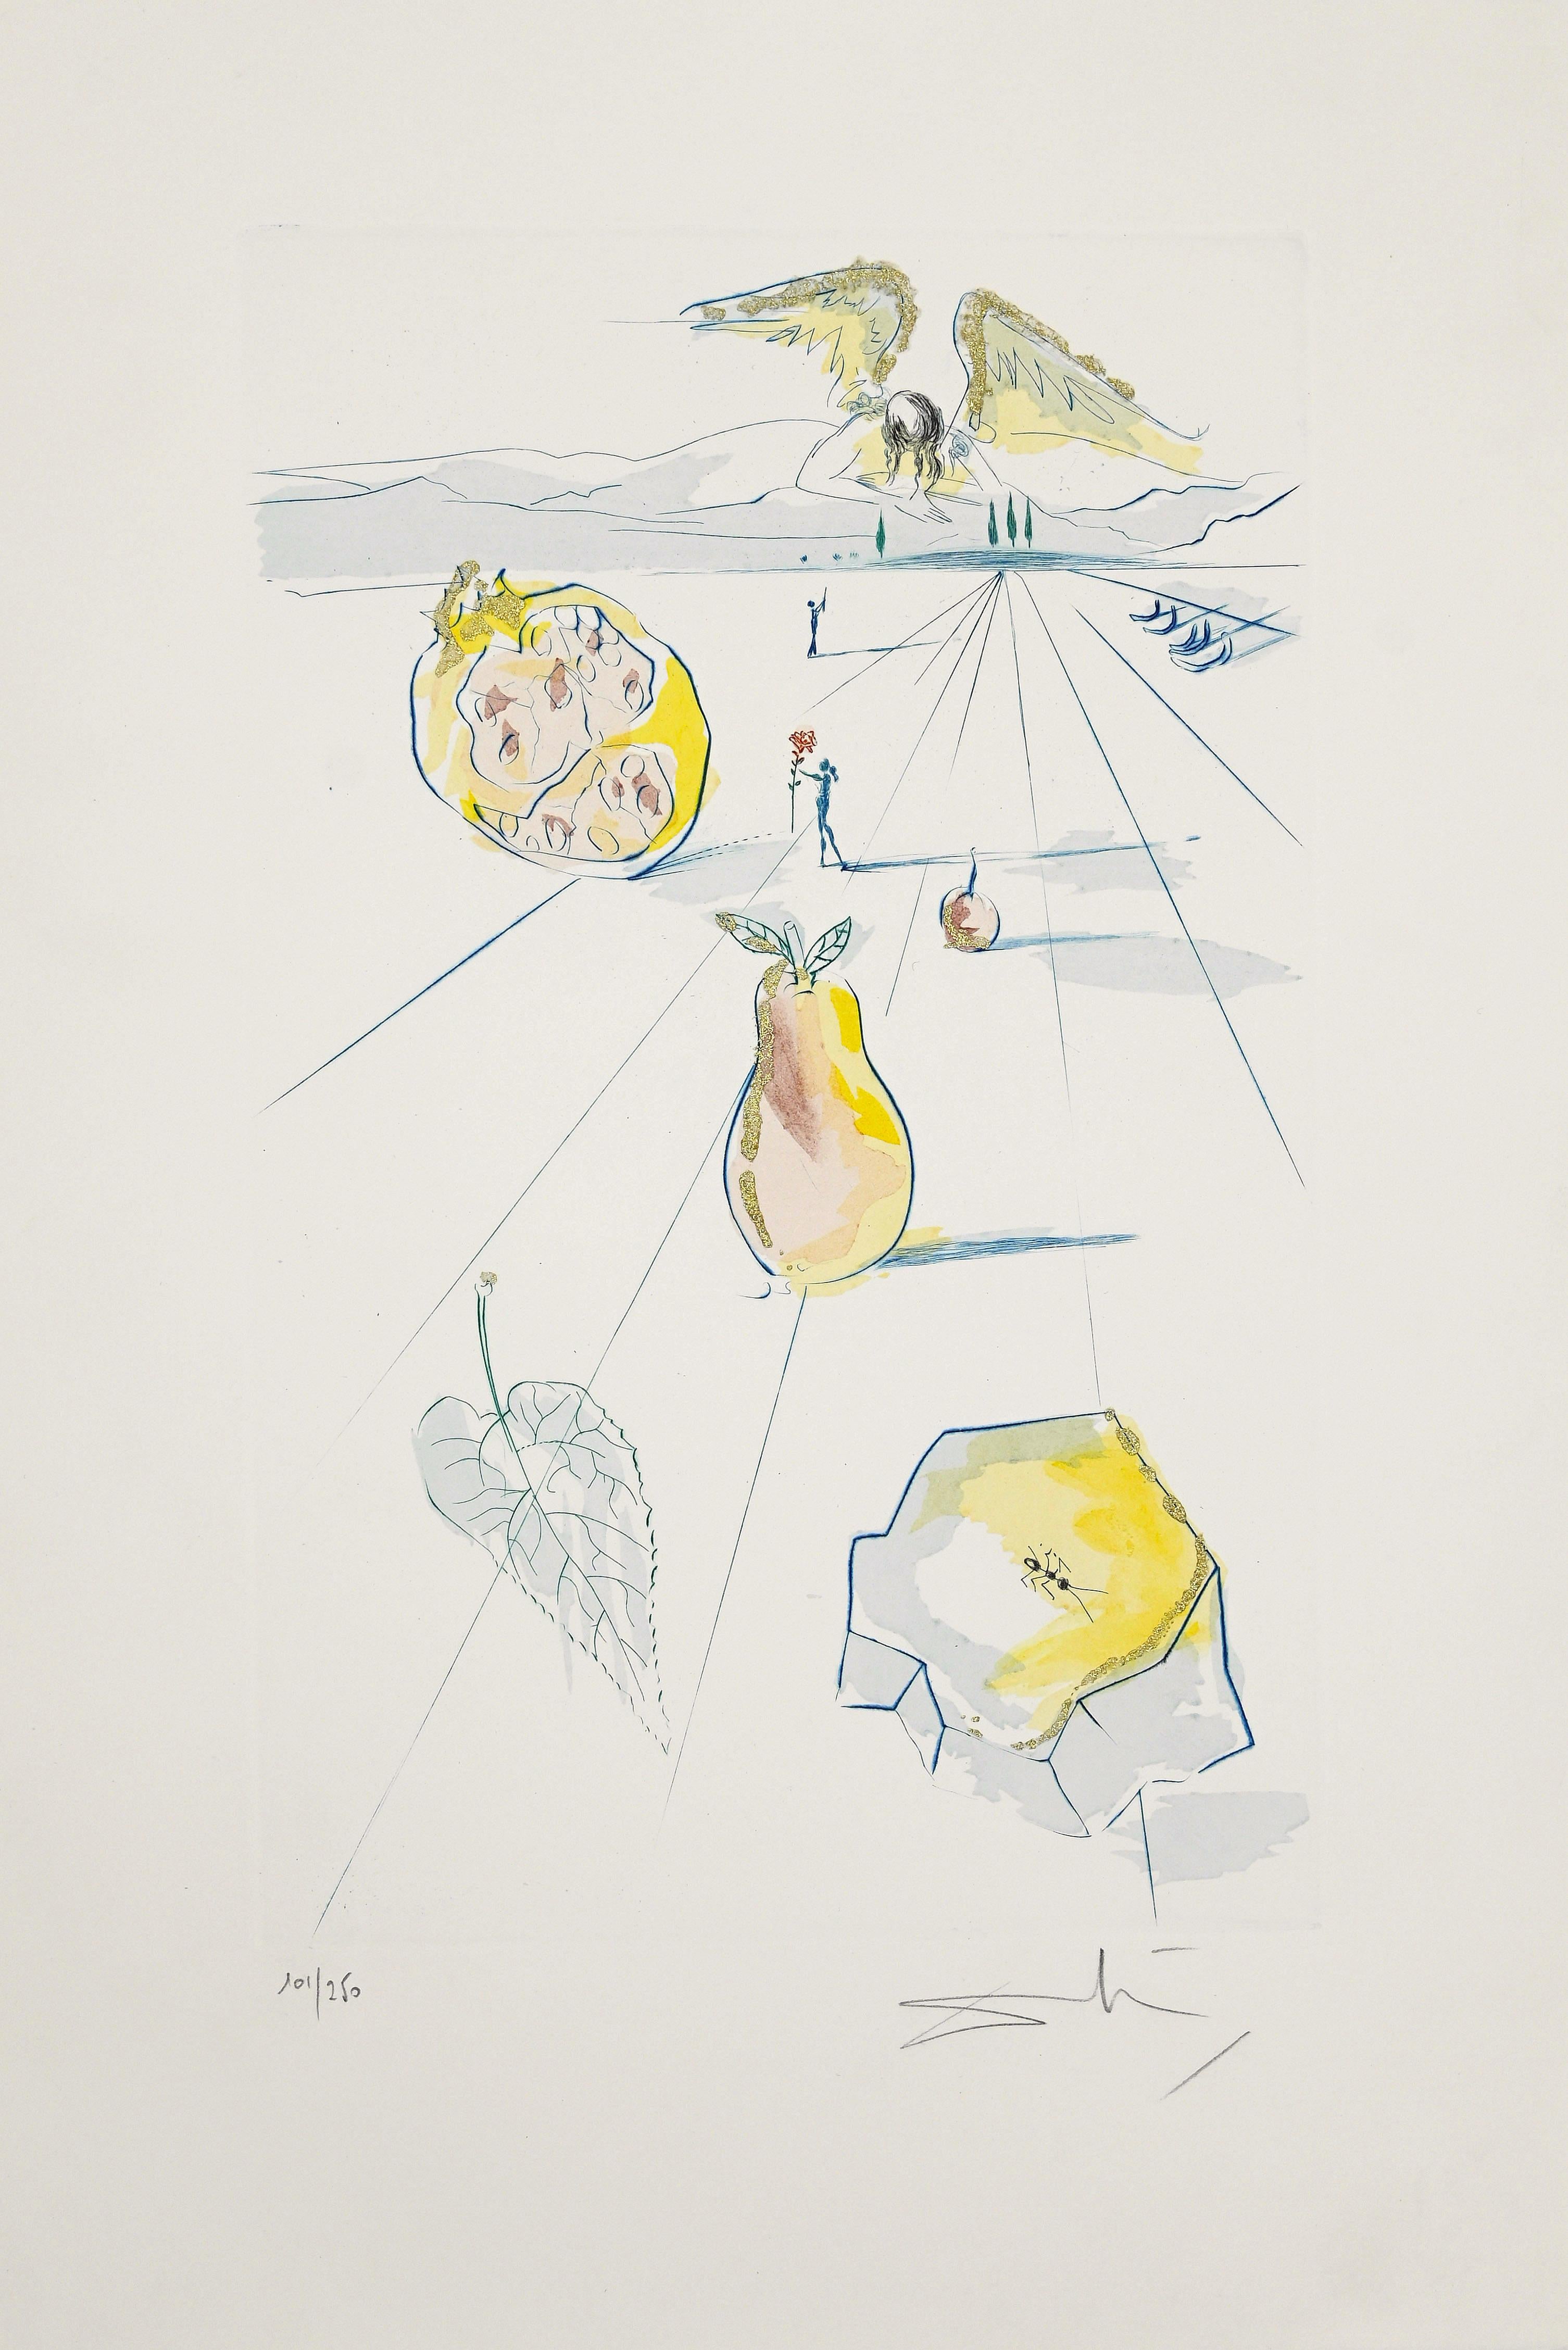 The Fruits of the Valley - Original Etching by Salvador Dalì - 1971 - Print by Salvador Dalí